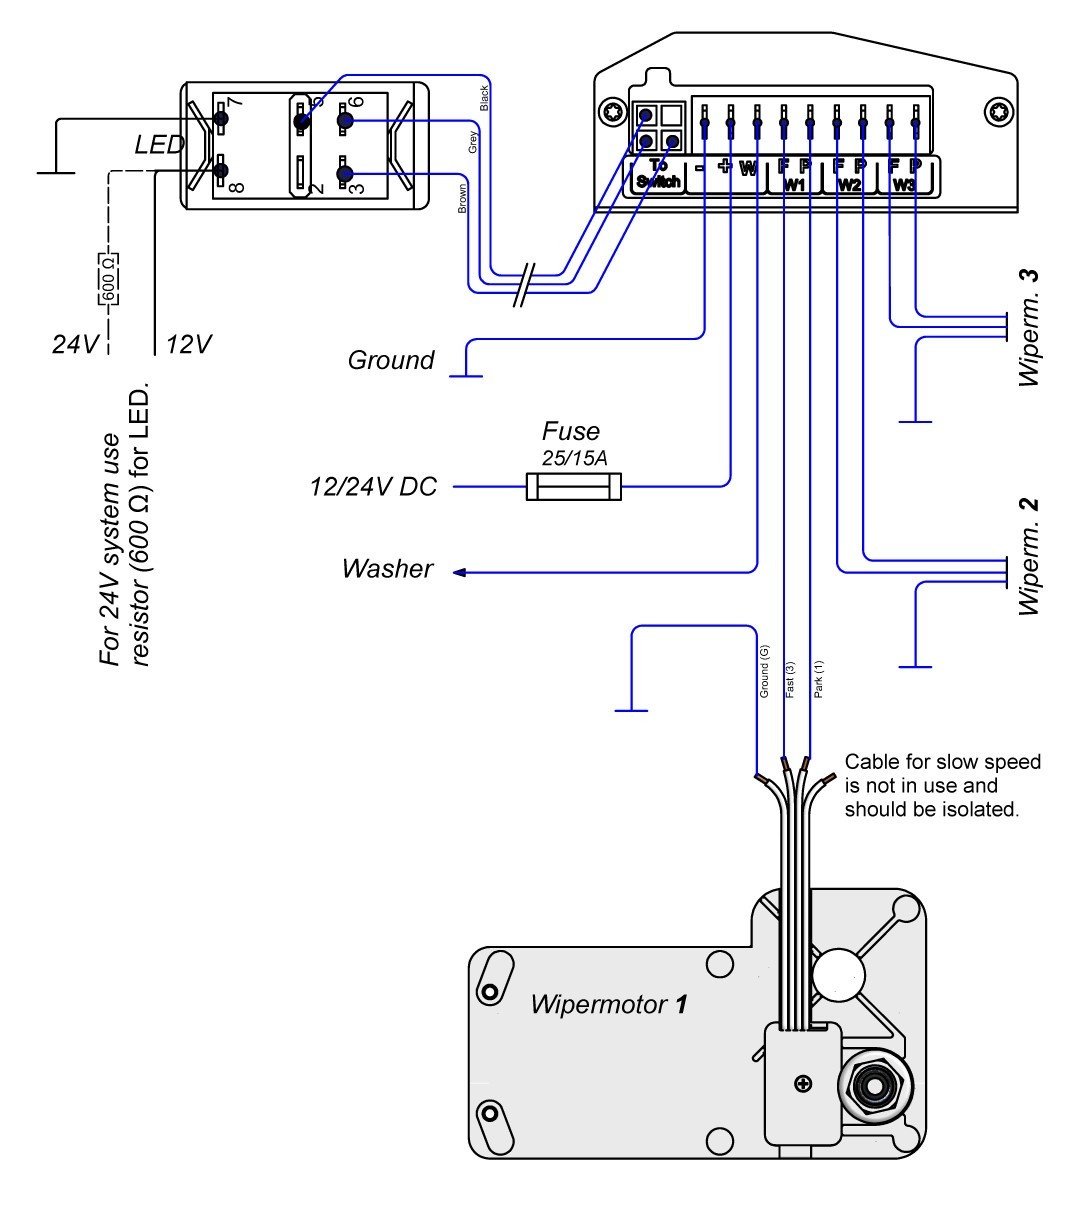 84 Chevy Wiper Motor Wiring Diagram from mainetreasurechest.com